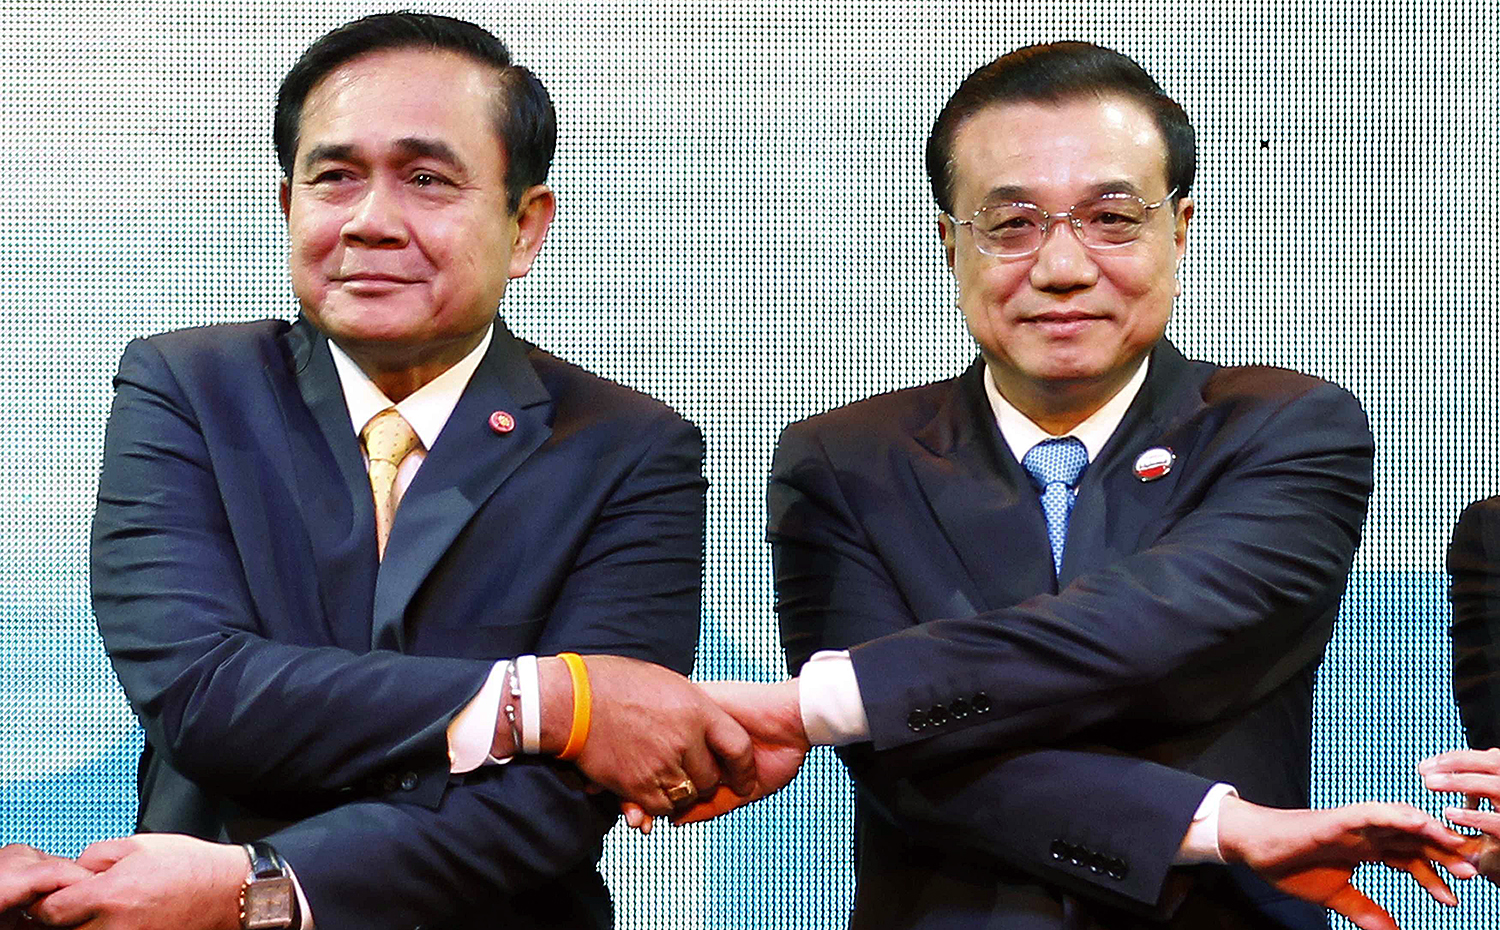 Thailand's Prime Minister Prayuth Chan-ocha (L) and China's Premier Li Keqiang, pose for photographers during Openning Ceremony of the 5th Greater Mekong Subregion (GMS) Summit at a hotel in Bangkok December 20, 2014. REUTERS/Chaiwat Subprasom (THAILAND - Tags: POLITICS BUSINESS ENVIRONMENT SOCIETY)